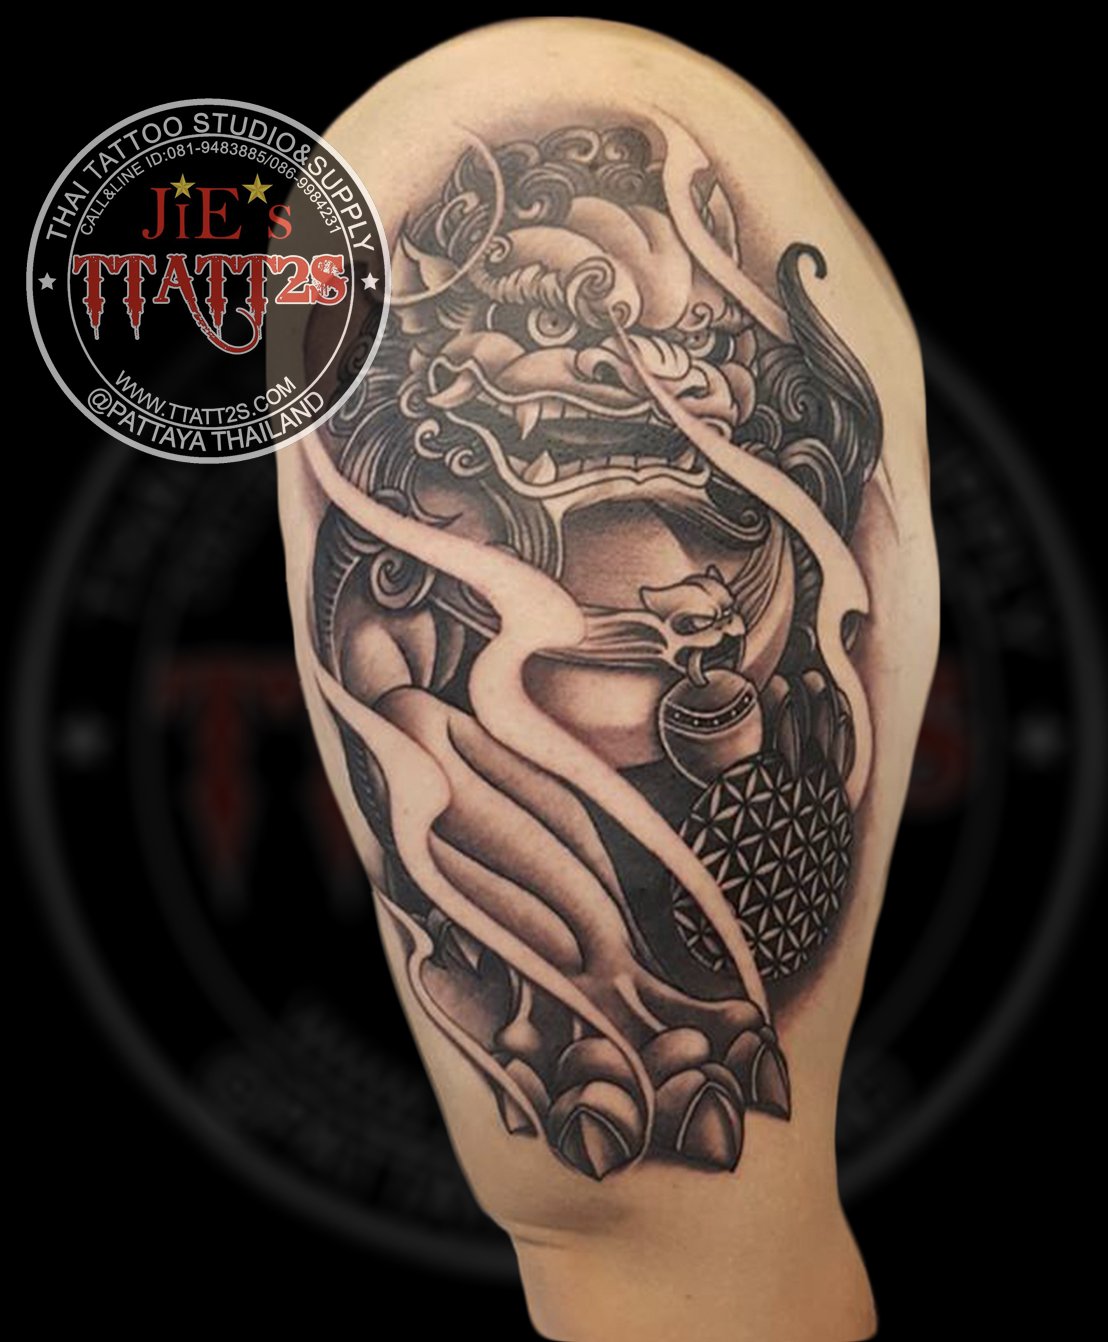 Thai tattoo studiopattaya  The home of Pattaya tattoo and  supplies/ Largest supplier in the eastern provinces